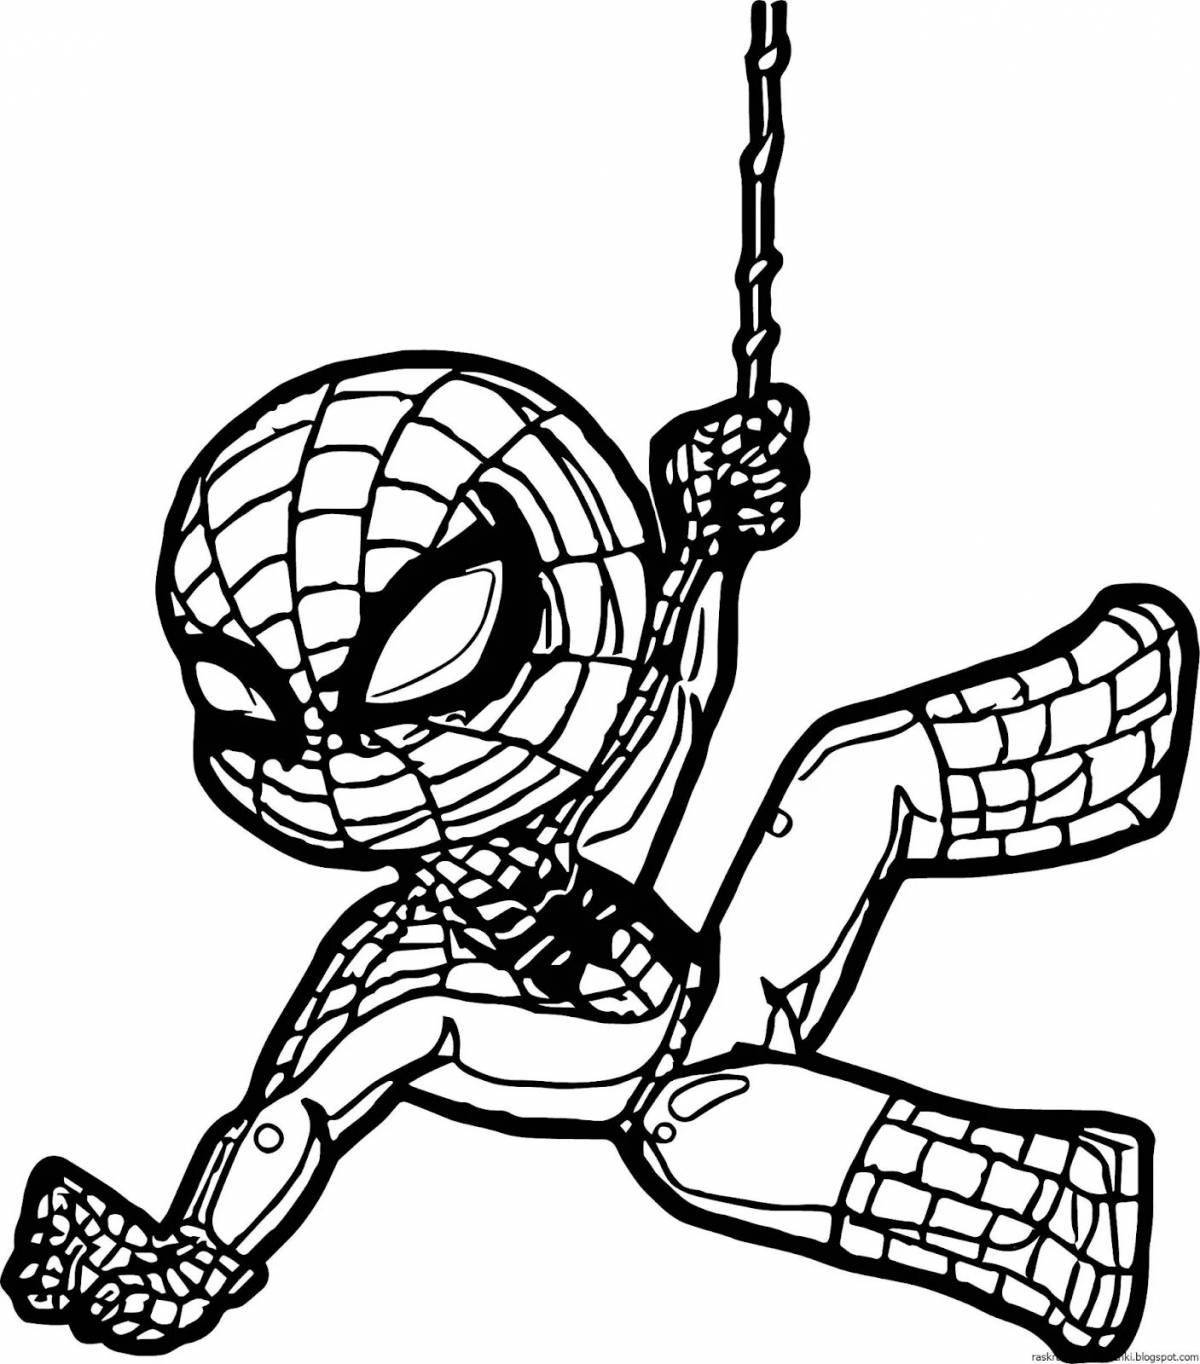 Animated spiderman coloring page